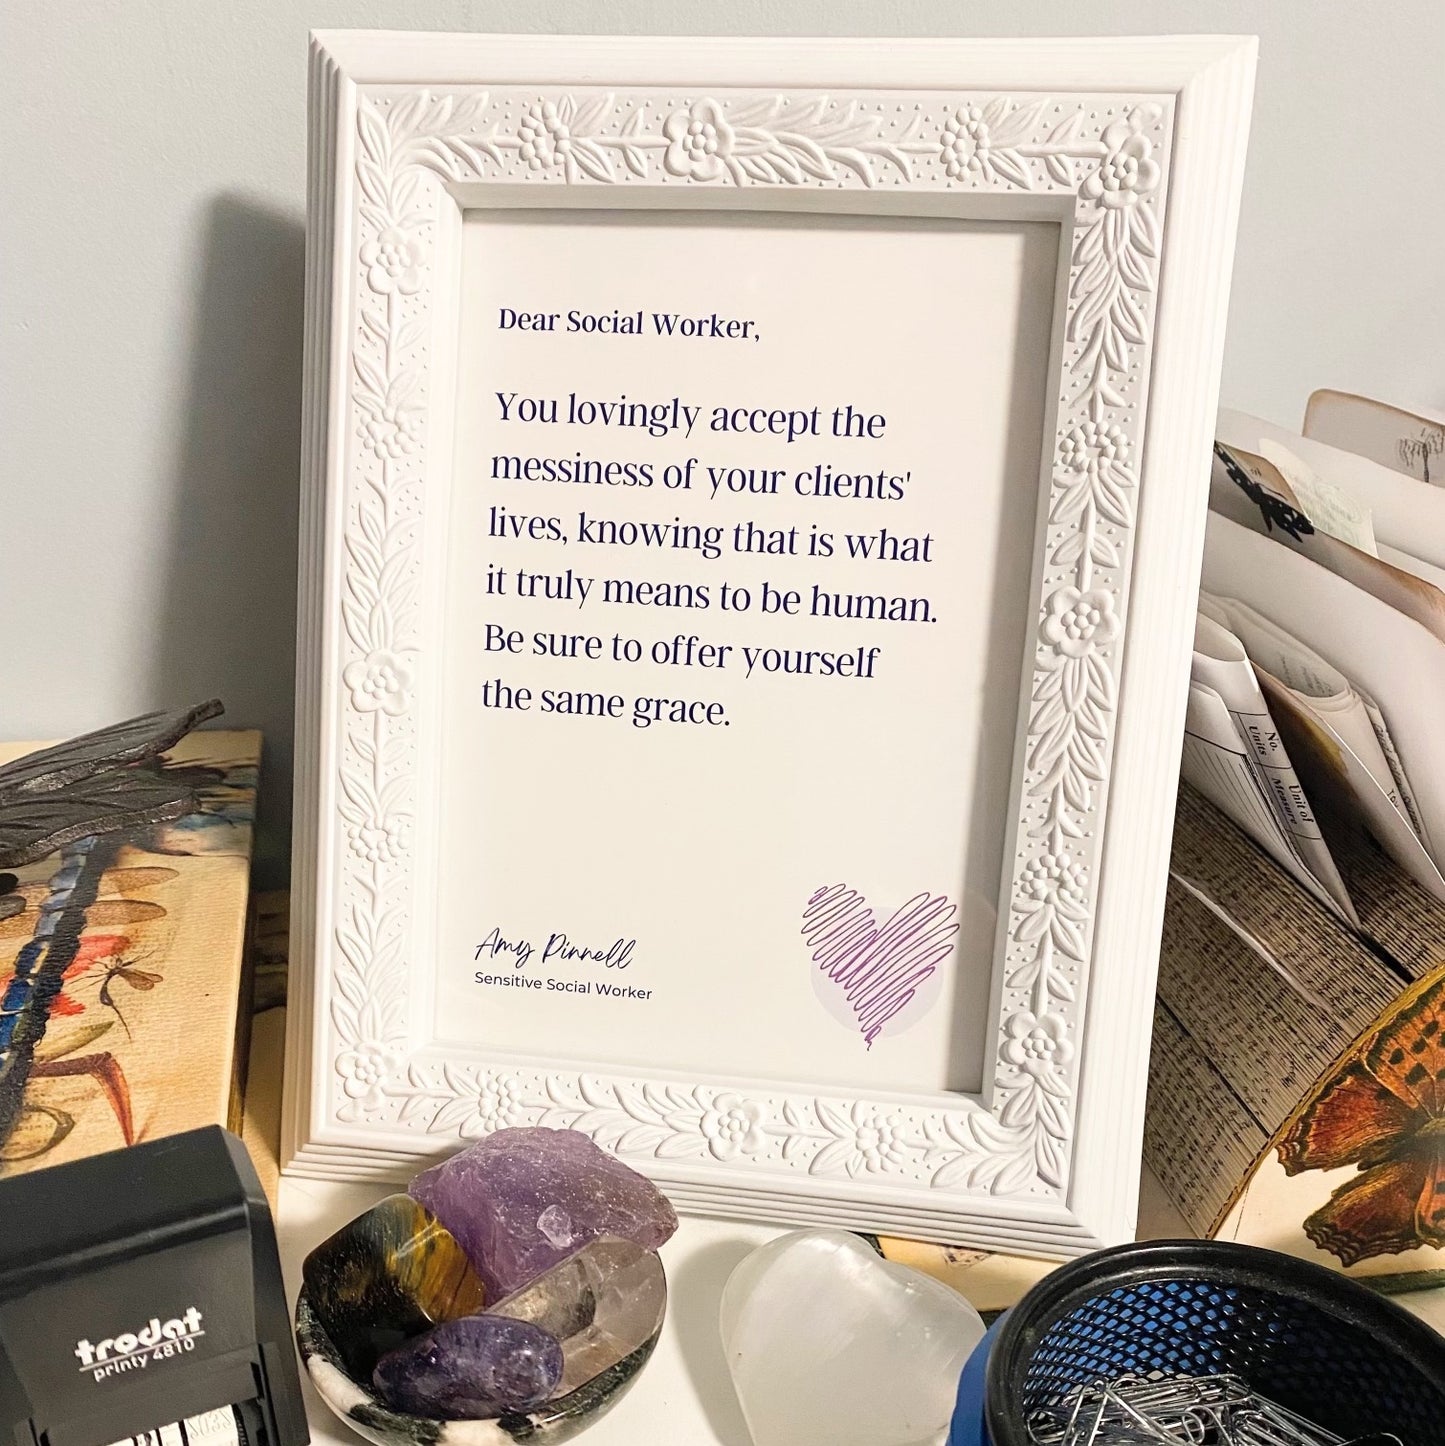 The print is shown inside a white frame, on a white desk surrounded by office items. The print is white with dark purple font and reads "Dear Social Worker, You lovingly accept the messiness of your clients' lives, knowing that is what it truly means to be human. Be sure to offer yourself the same grace. Amy Pinnell, Sensitive Social Worker". In the bottom right corner of the print is a sketch of a scribbled purple heart. 